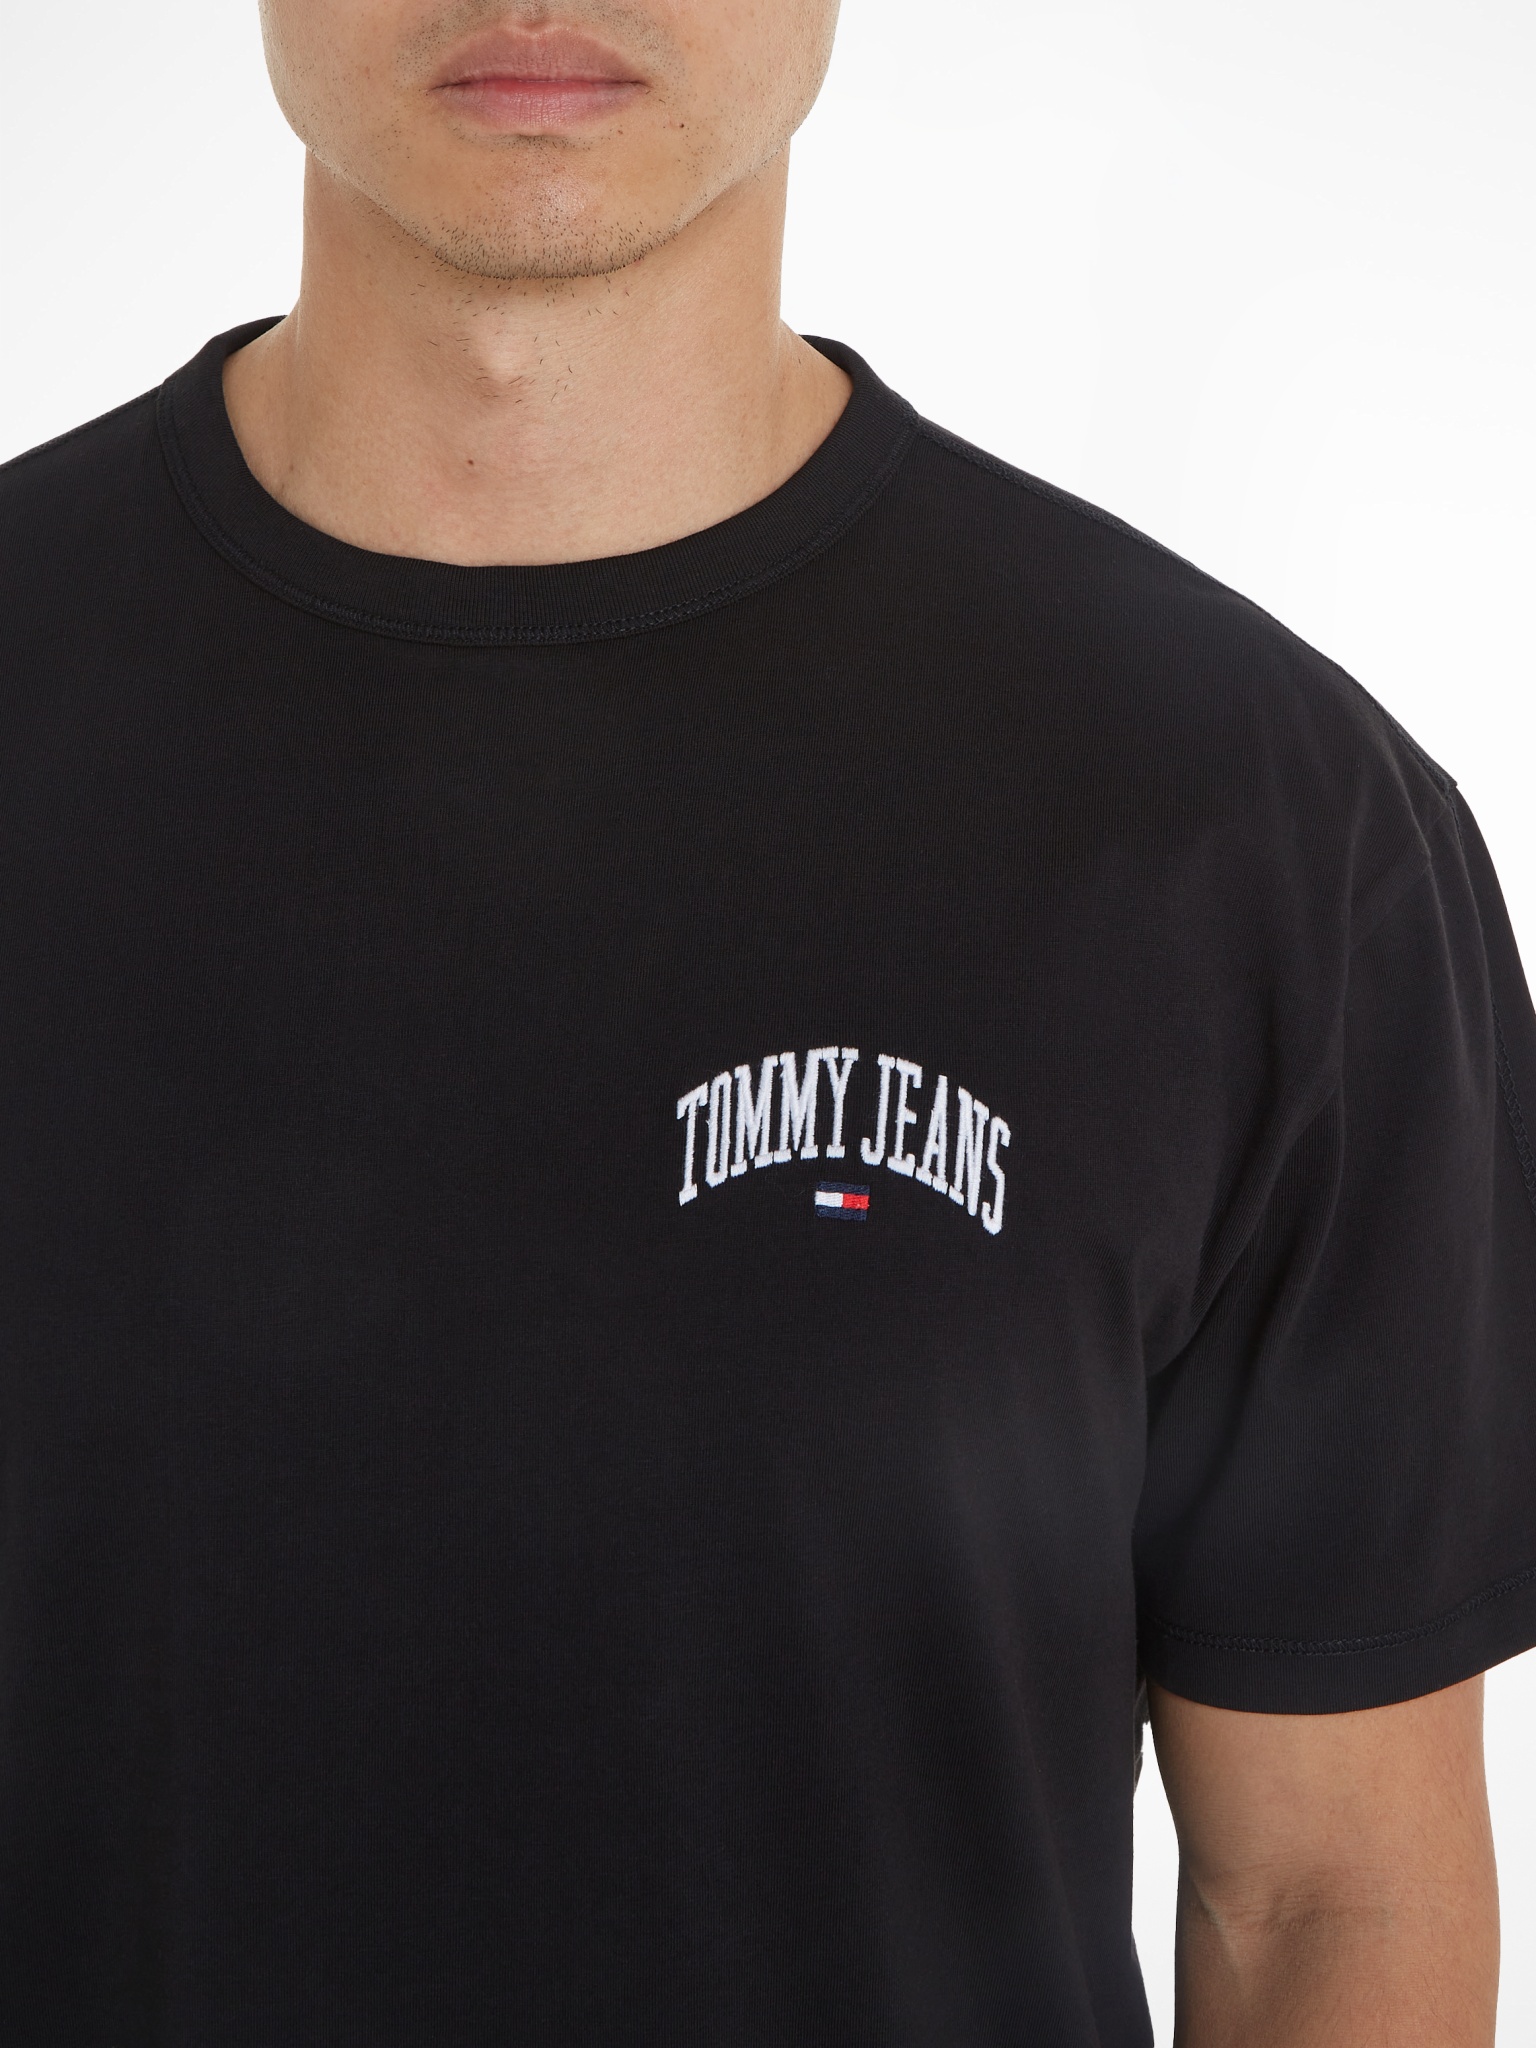 TOMMY JEANS T-Shirt 10734898